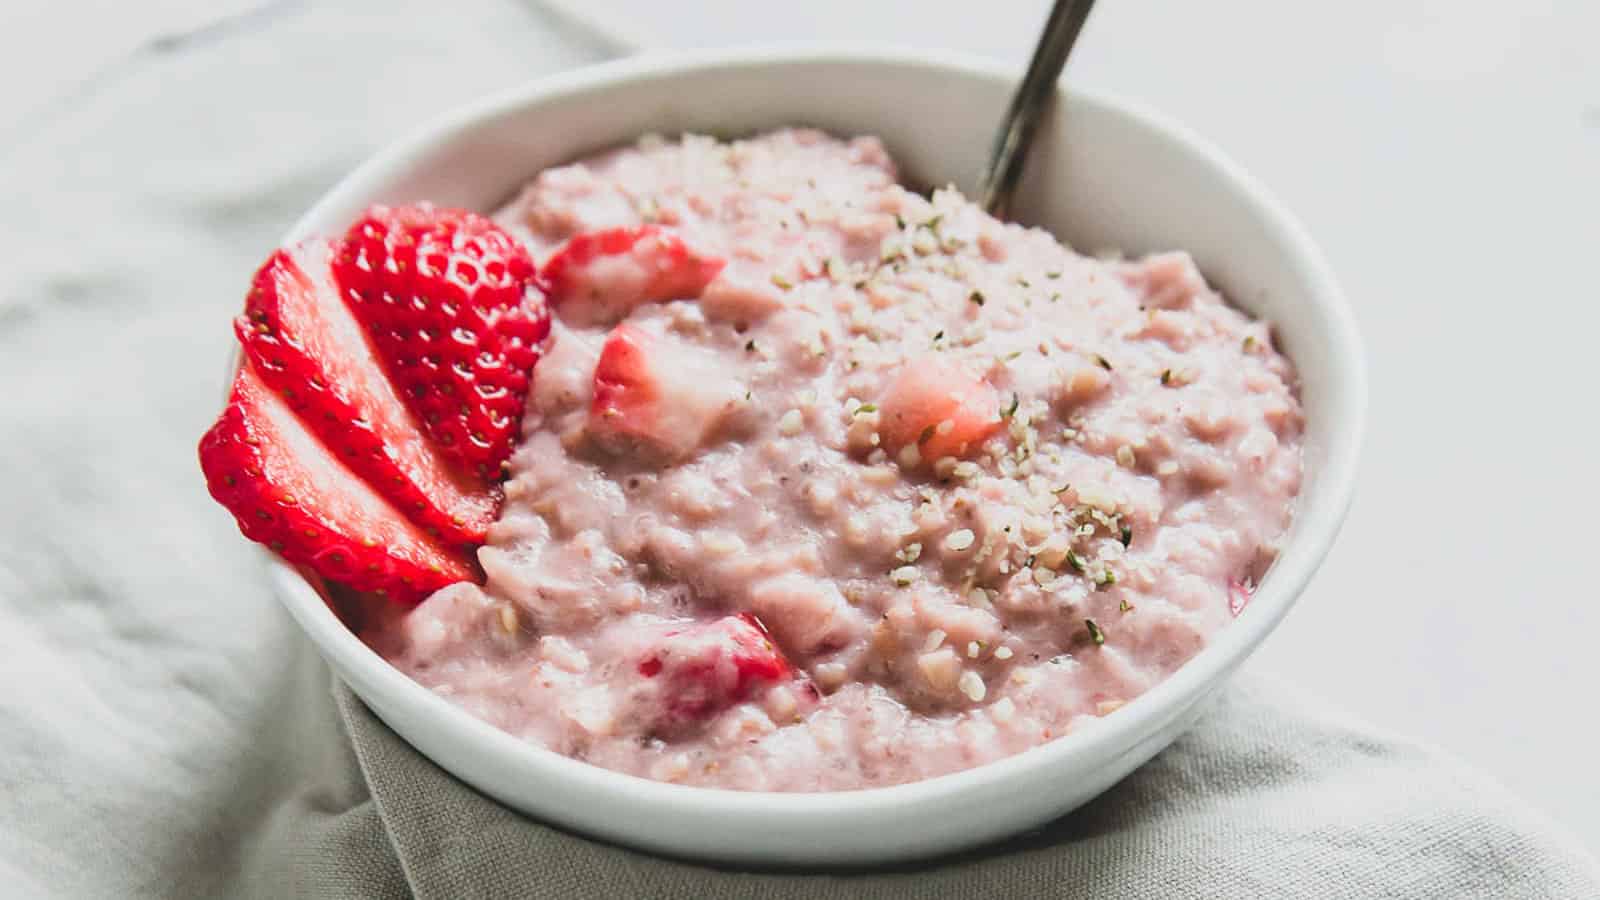 Strawberries and cream oatmeal garnished with fresh strawberry slices in a bowl with a spoon.